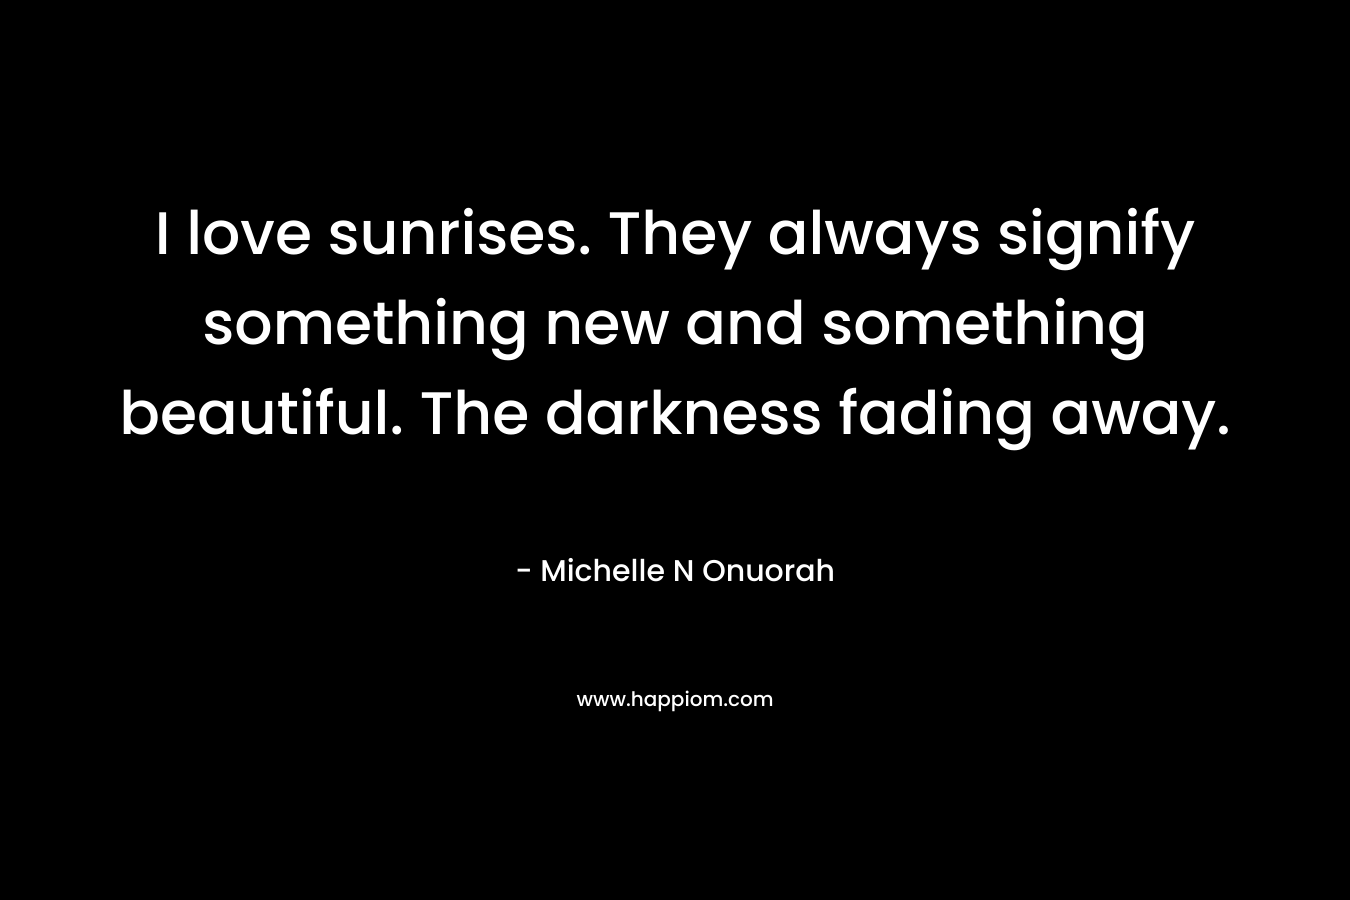 I love sunrises. They always signify something new and something beautiful. The darkness fading away. – Michelle N Onuorah